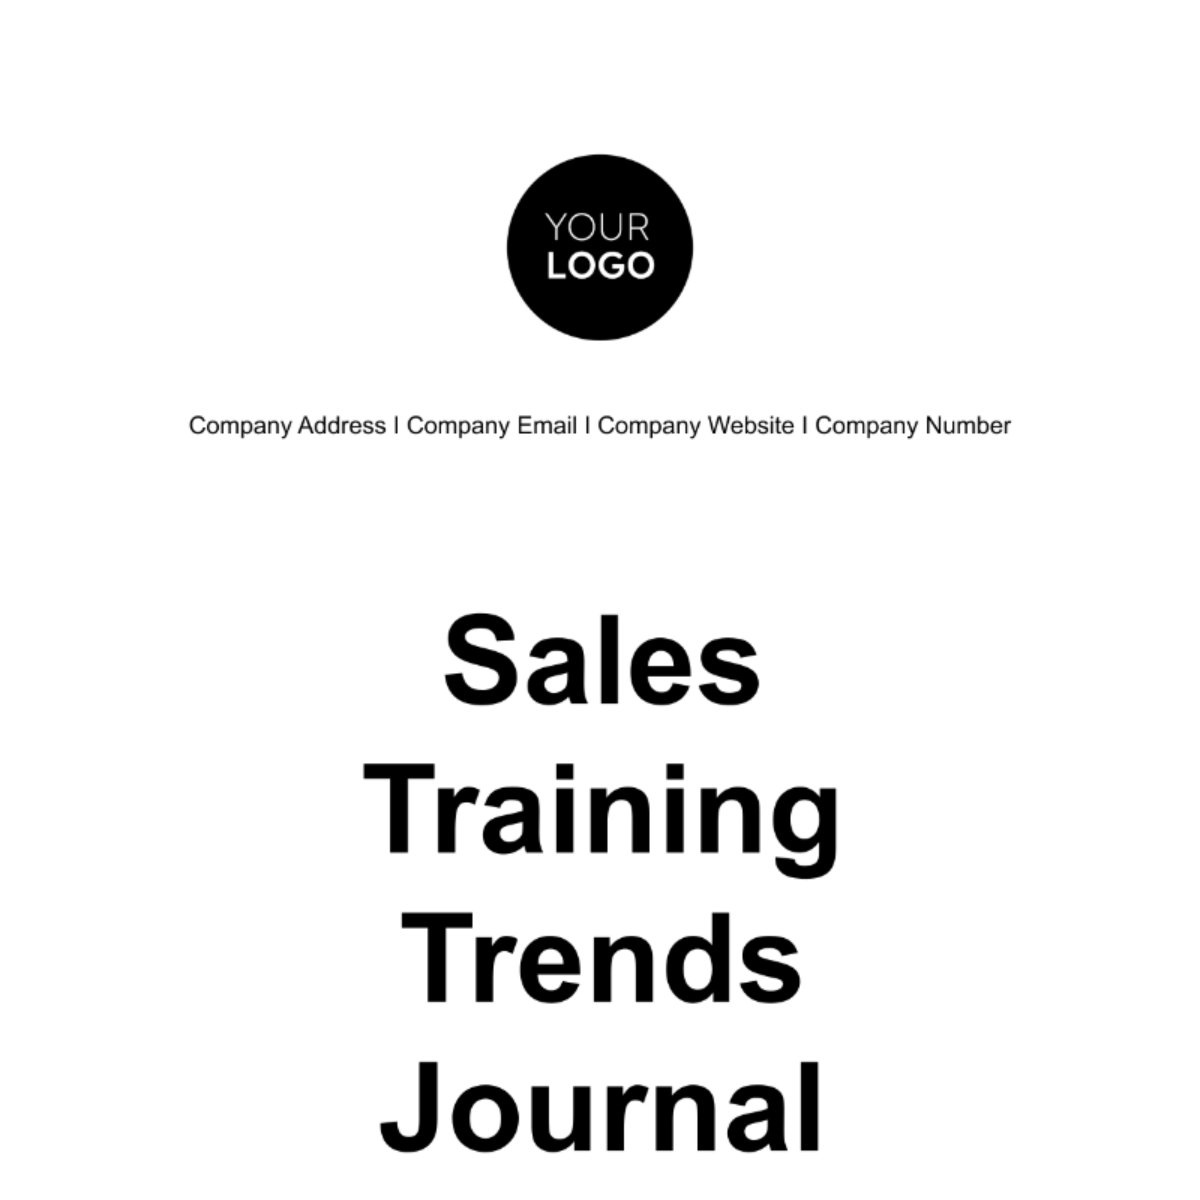 Sales Training Trends Journal Template